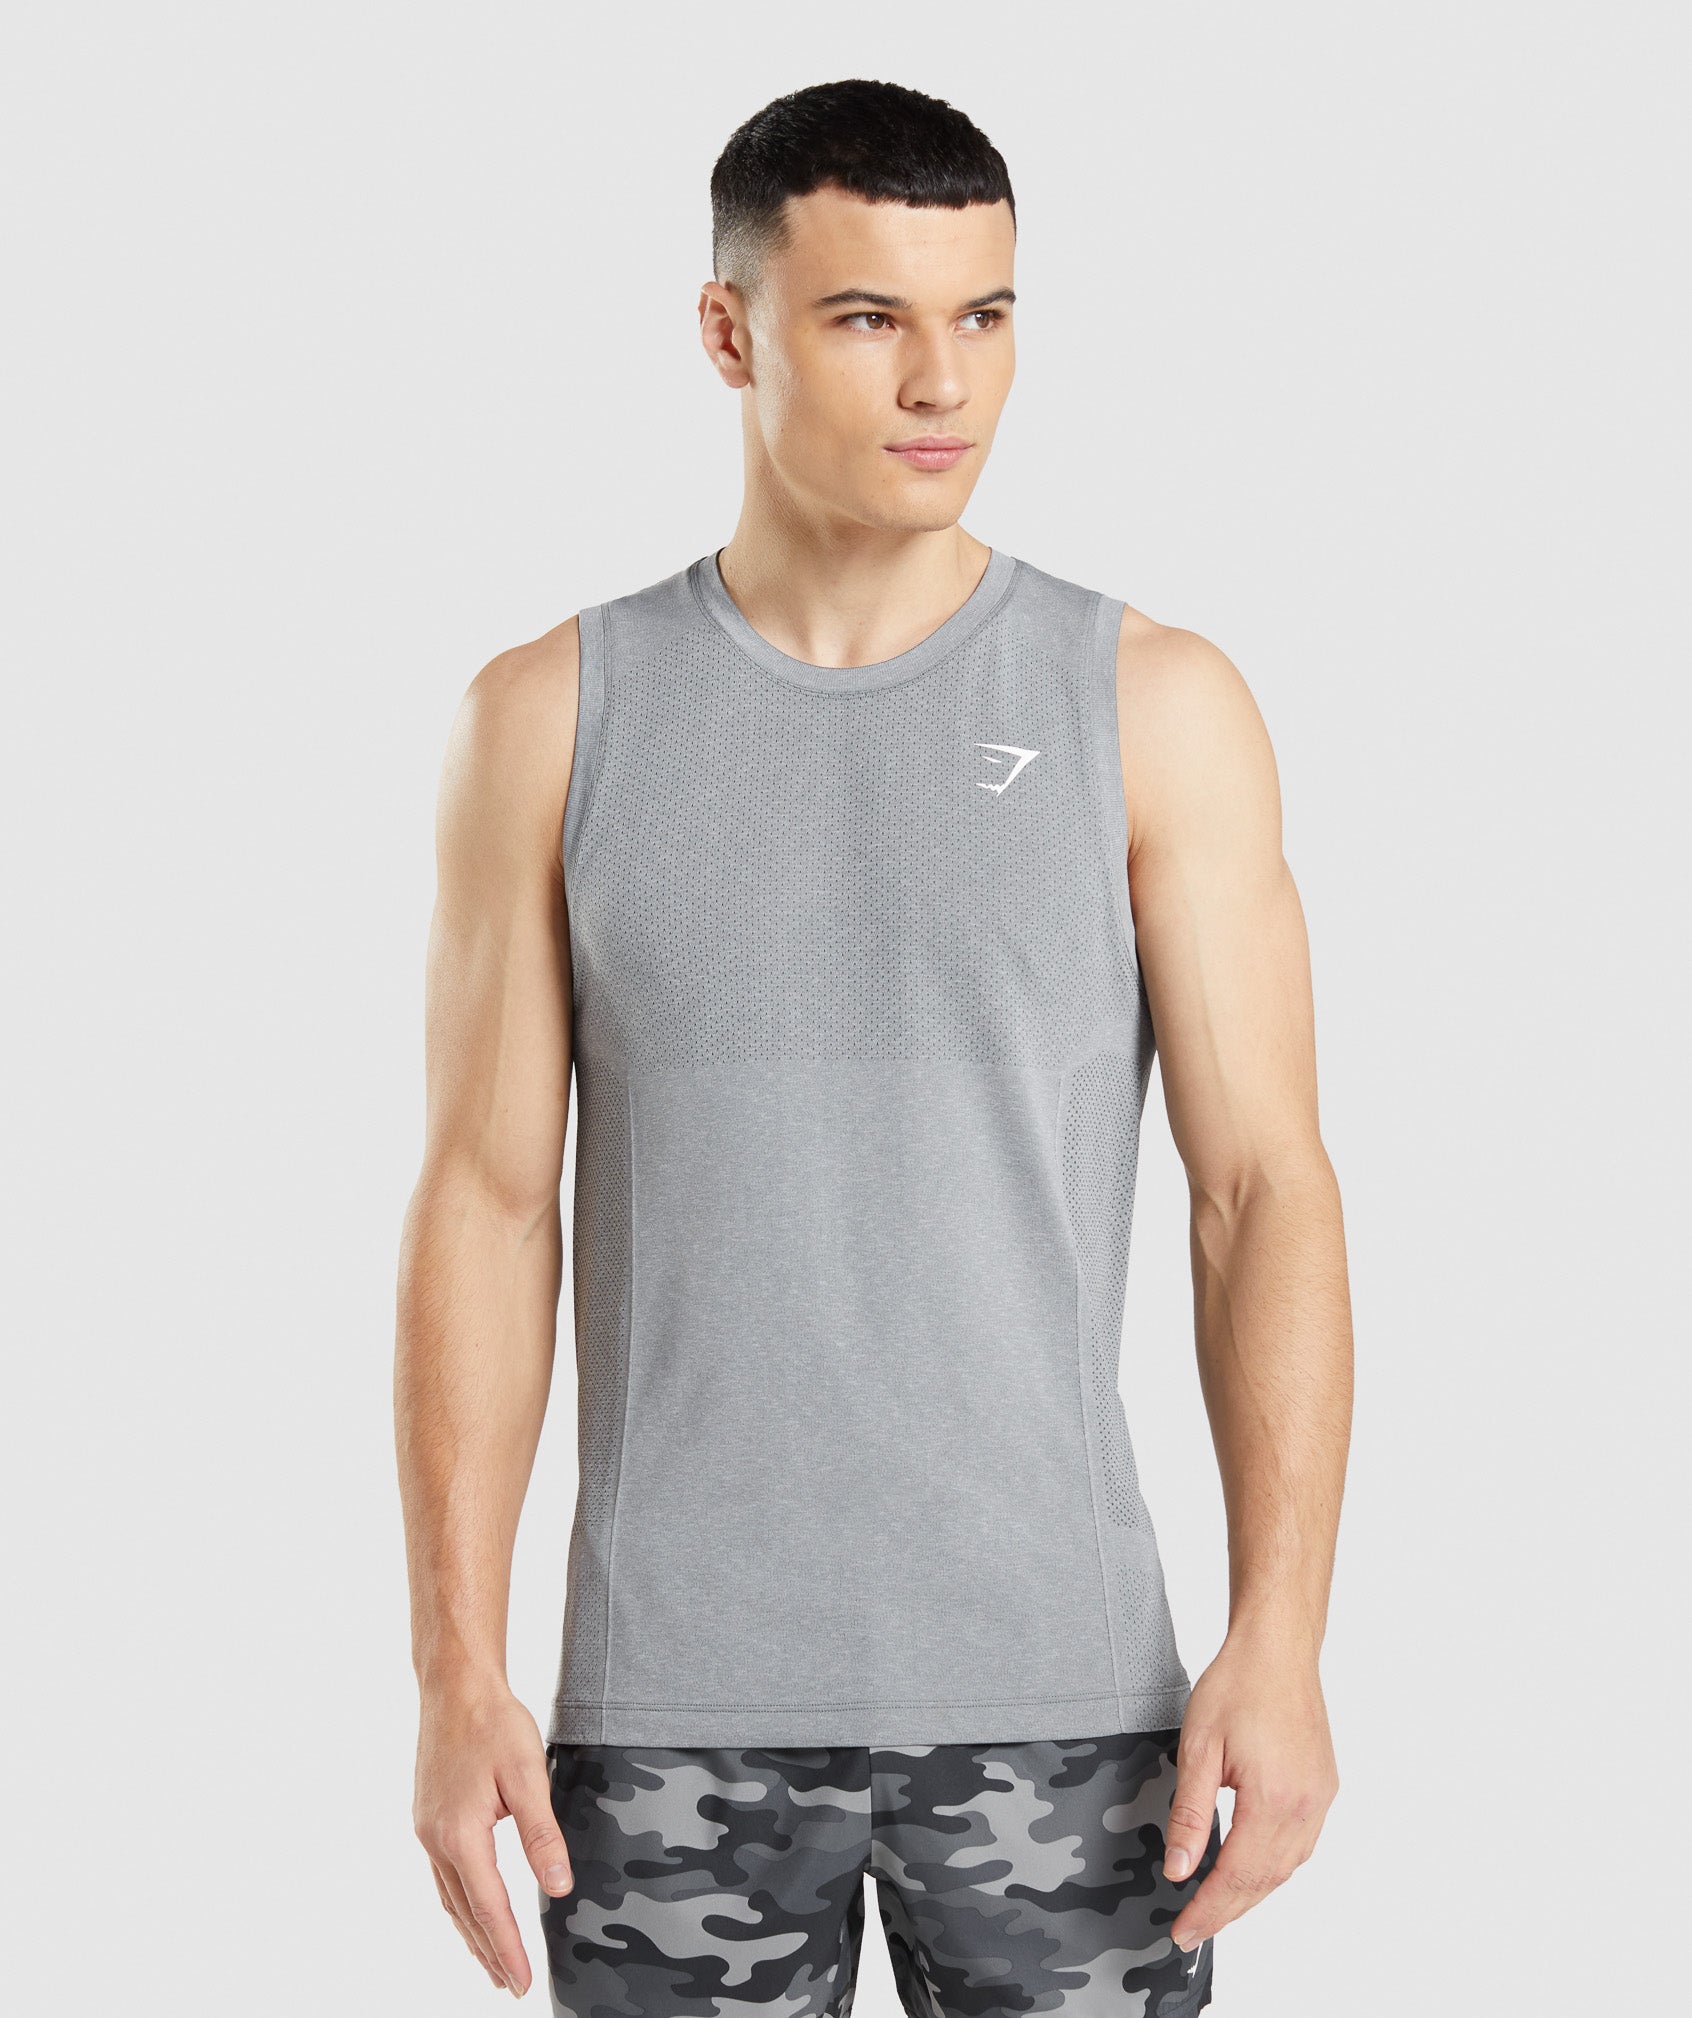 Best Selling Shopify Products on eu.gymshark.com-3